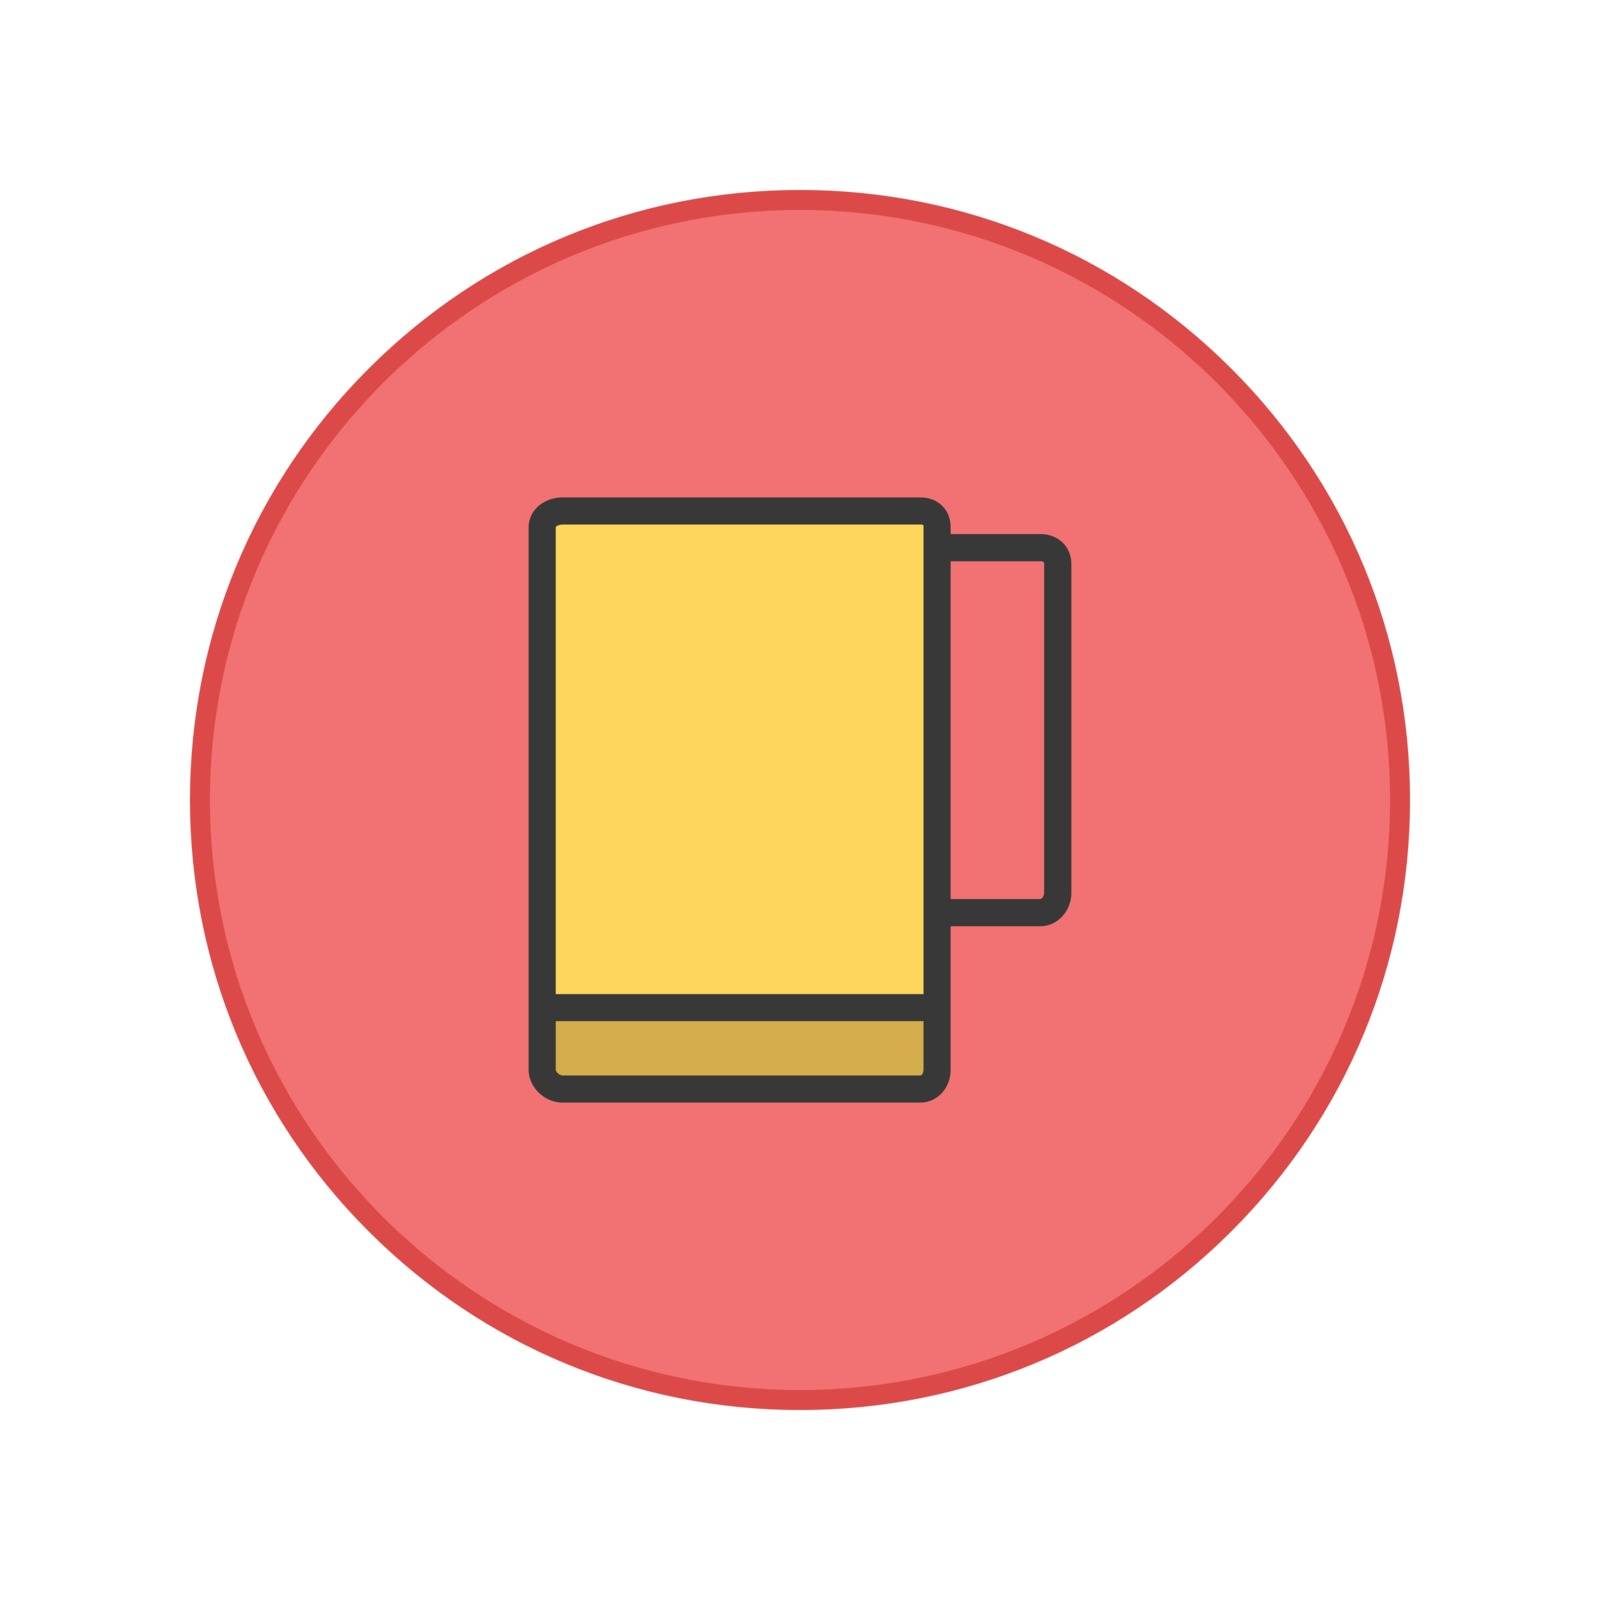 Beverage cup Icon red button